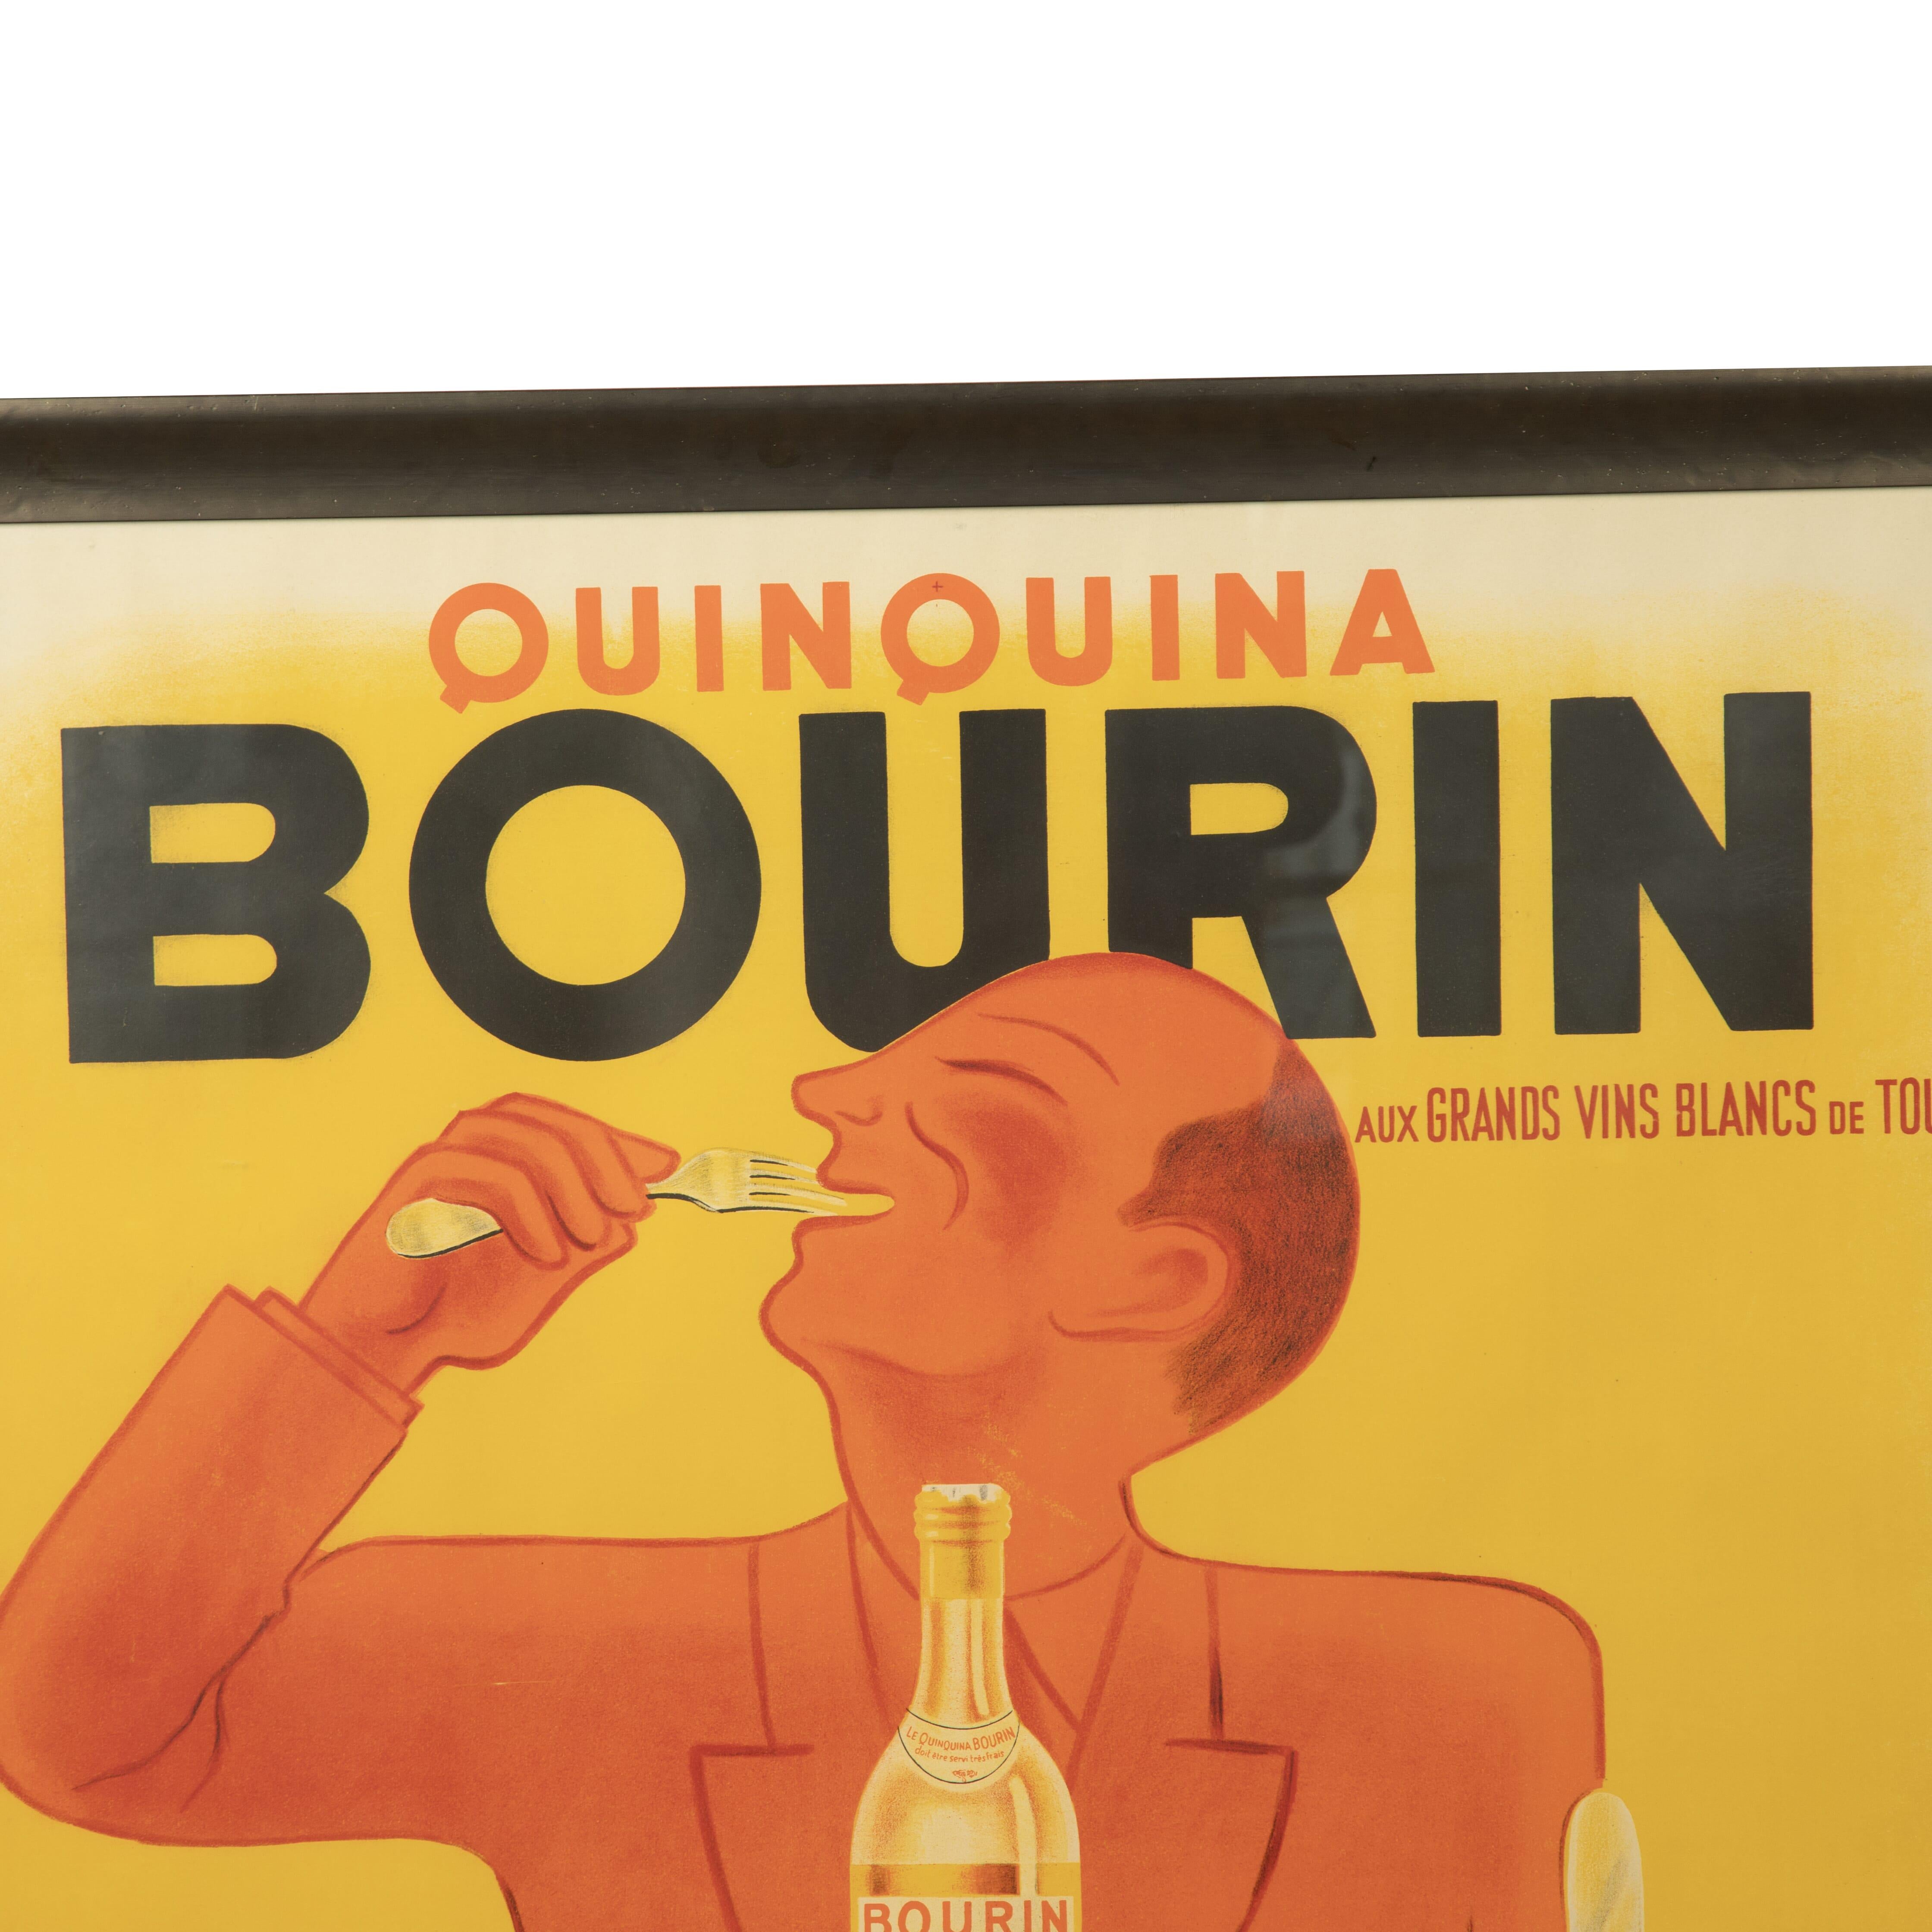 Swedish Original 20th Century French Bourin Poster For Sale